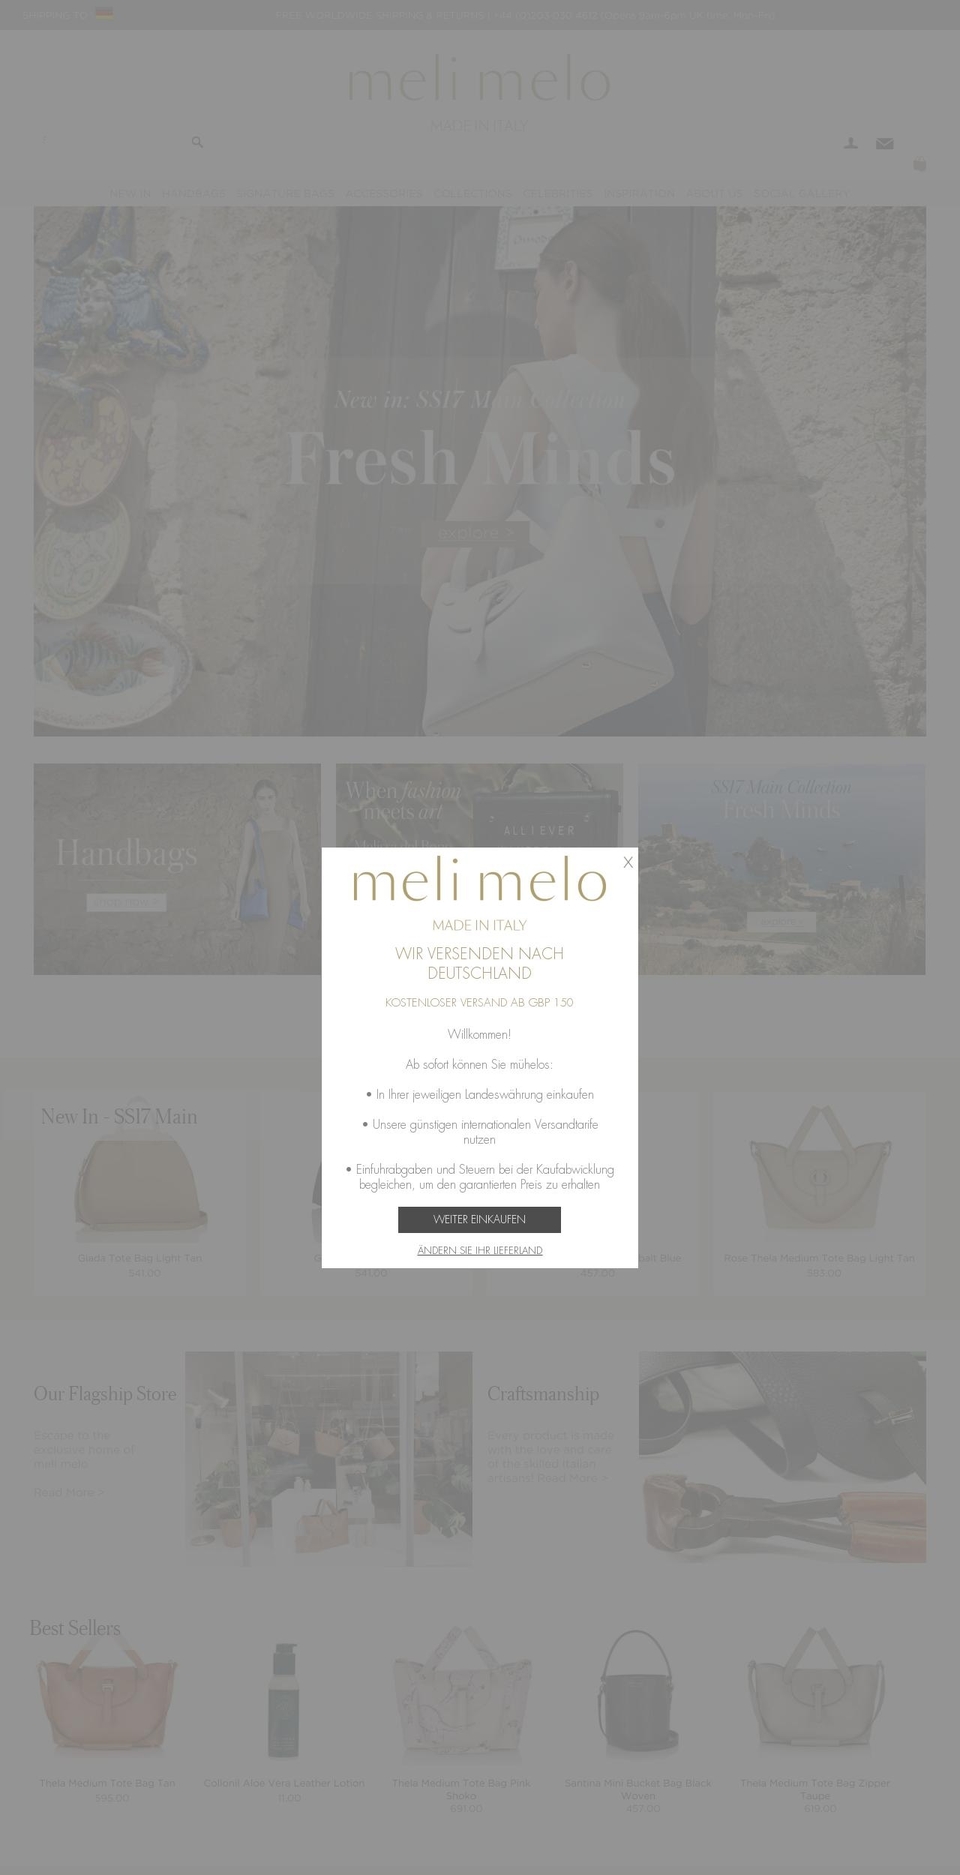 Maker Shopify theme site example melimelo.com